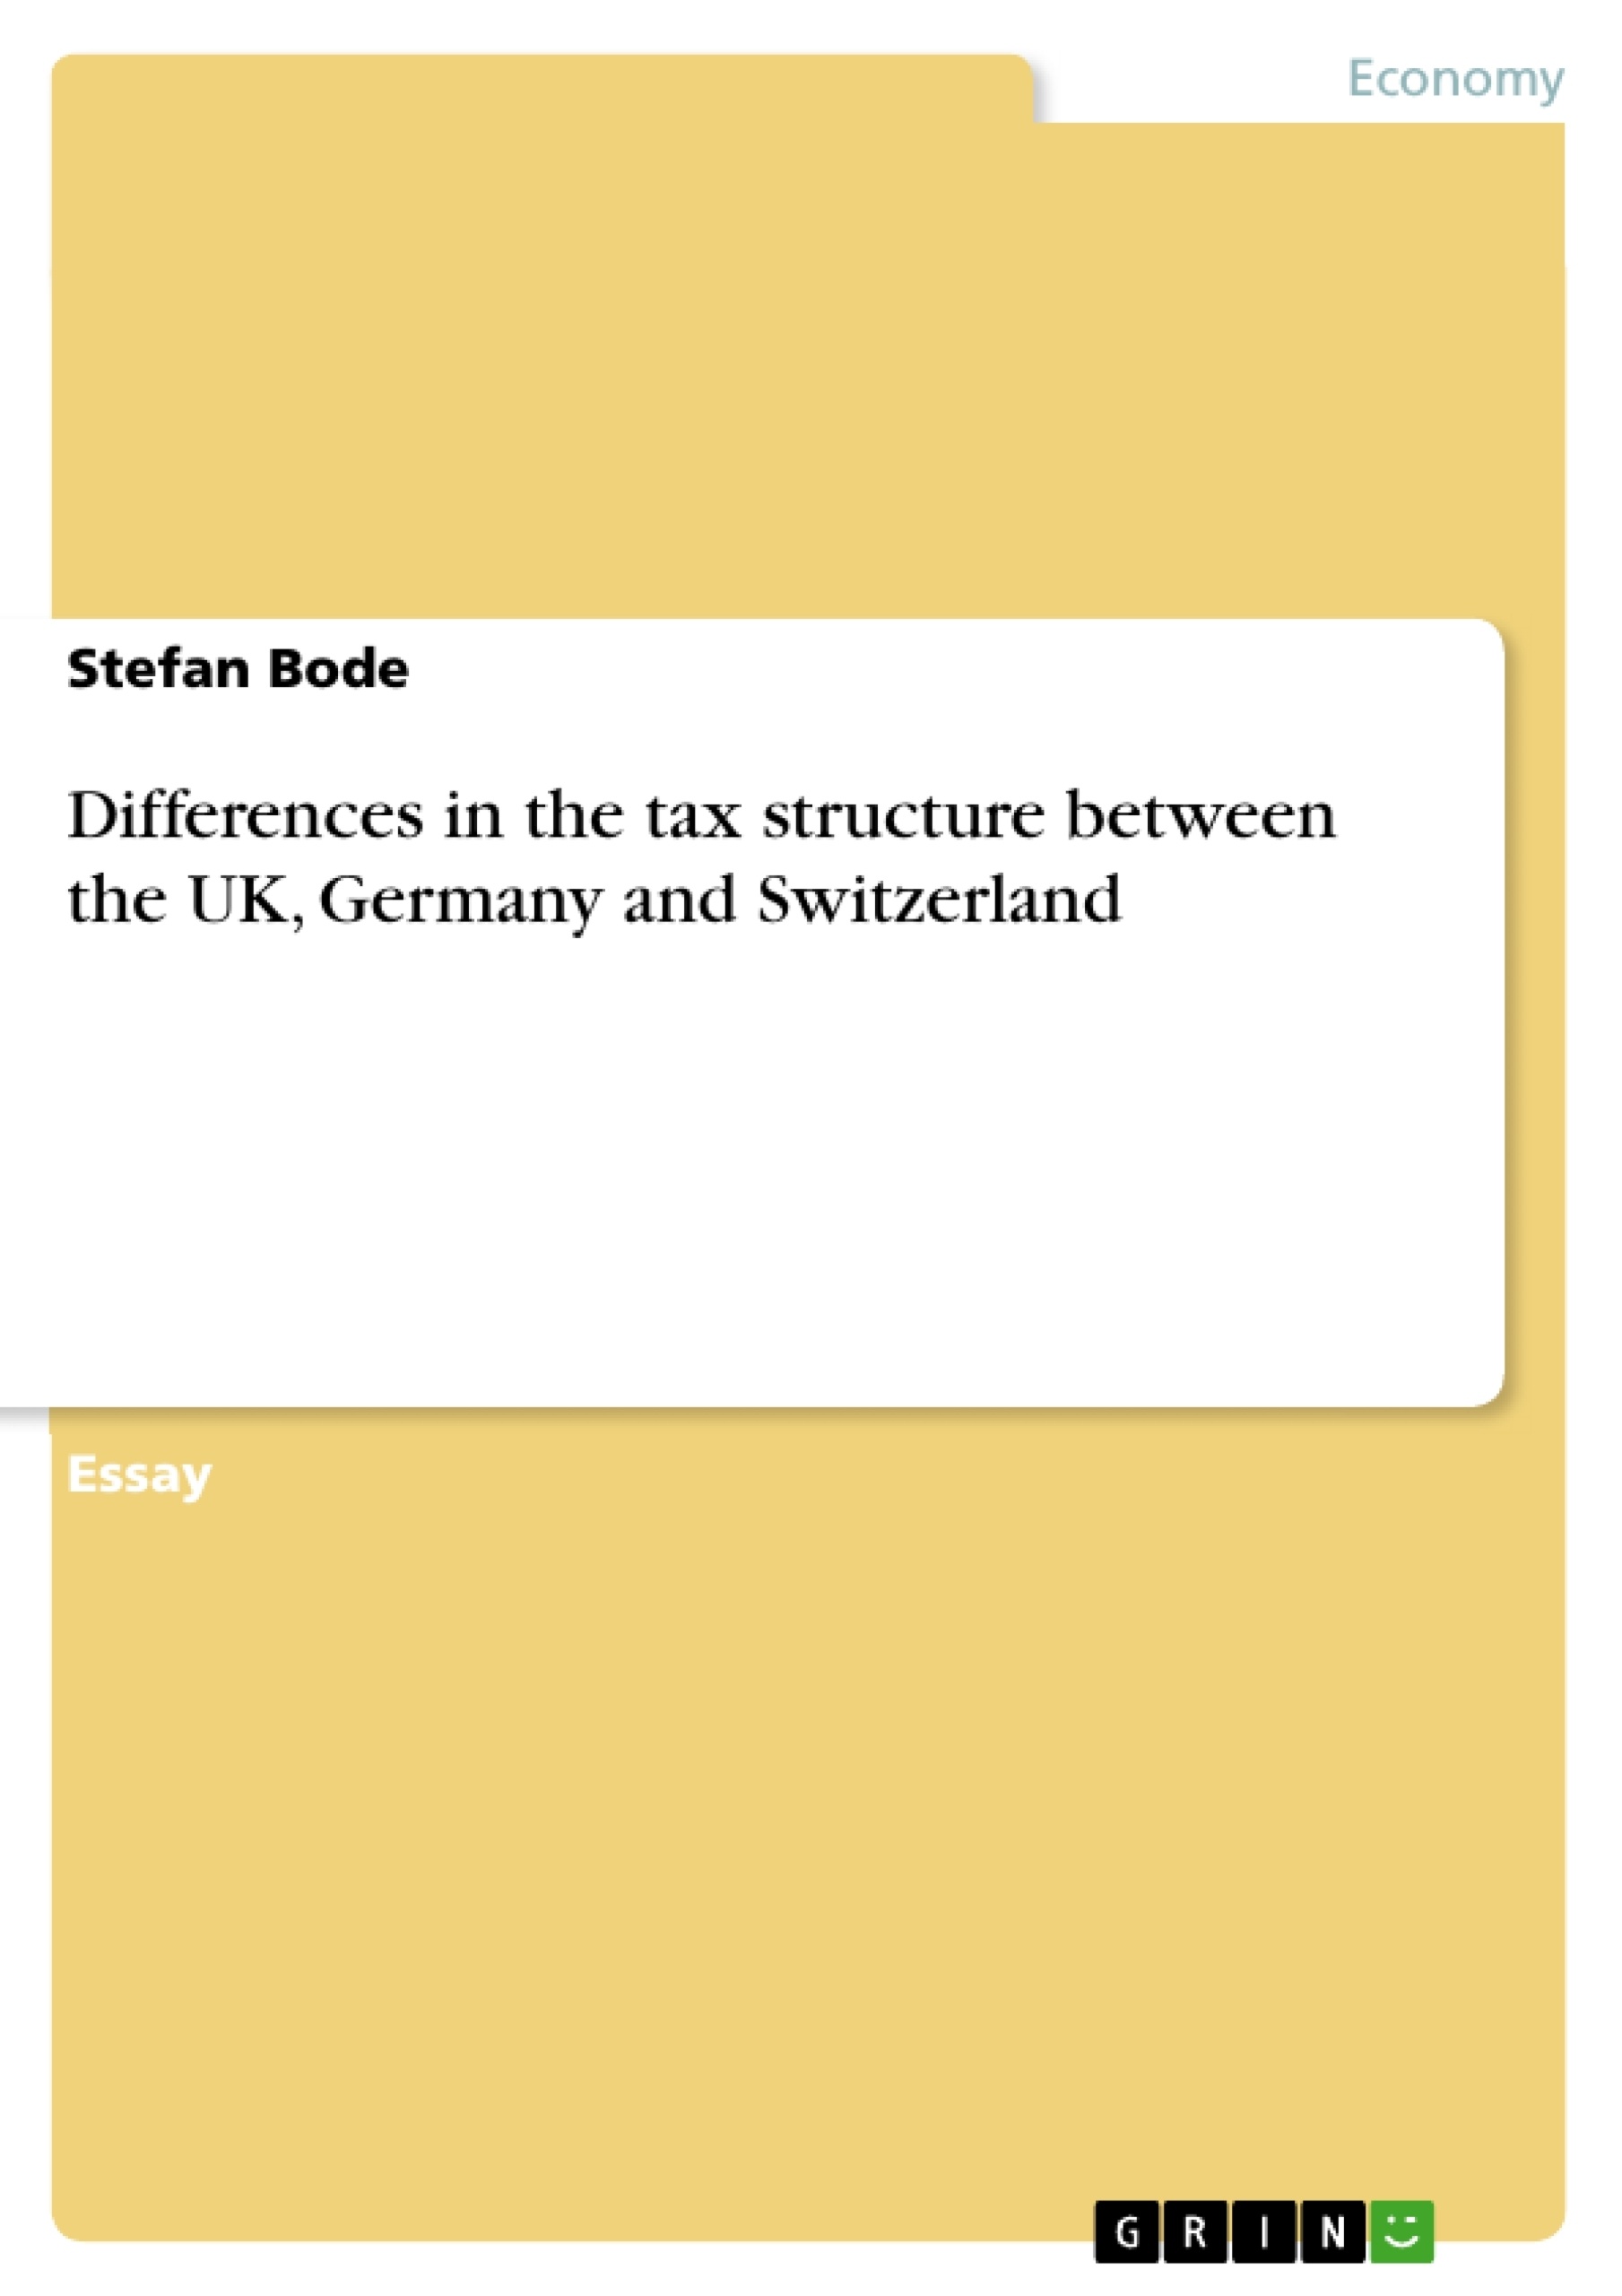 Título: Differences in the tax structure between the UK, Germany and Switzerland